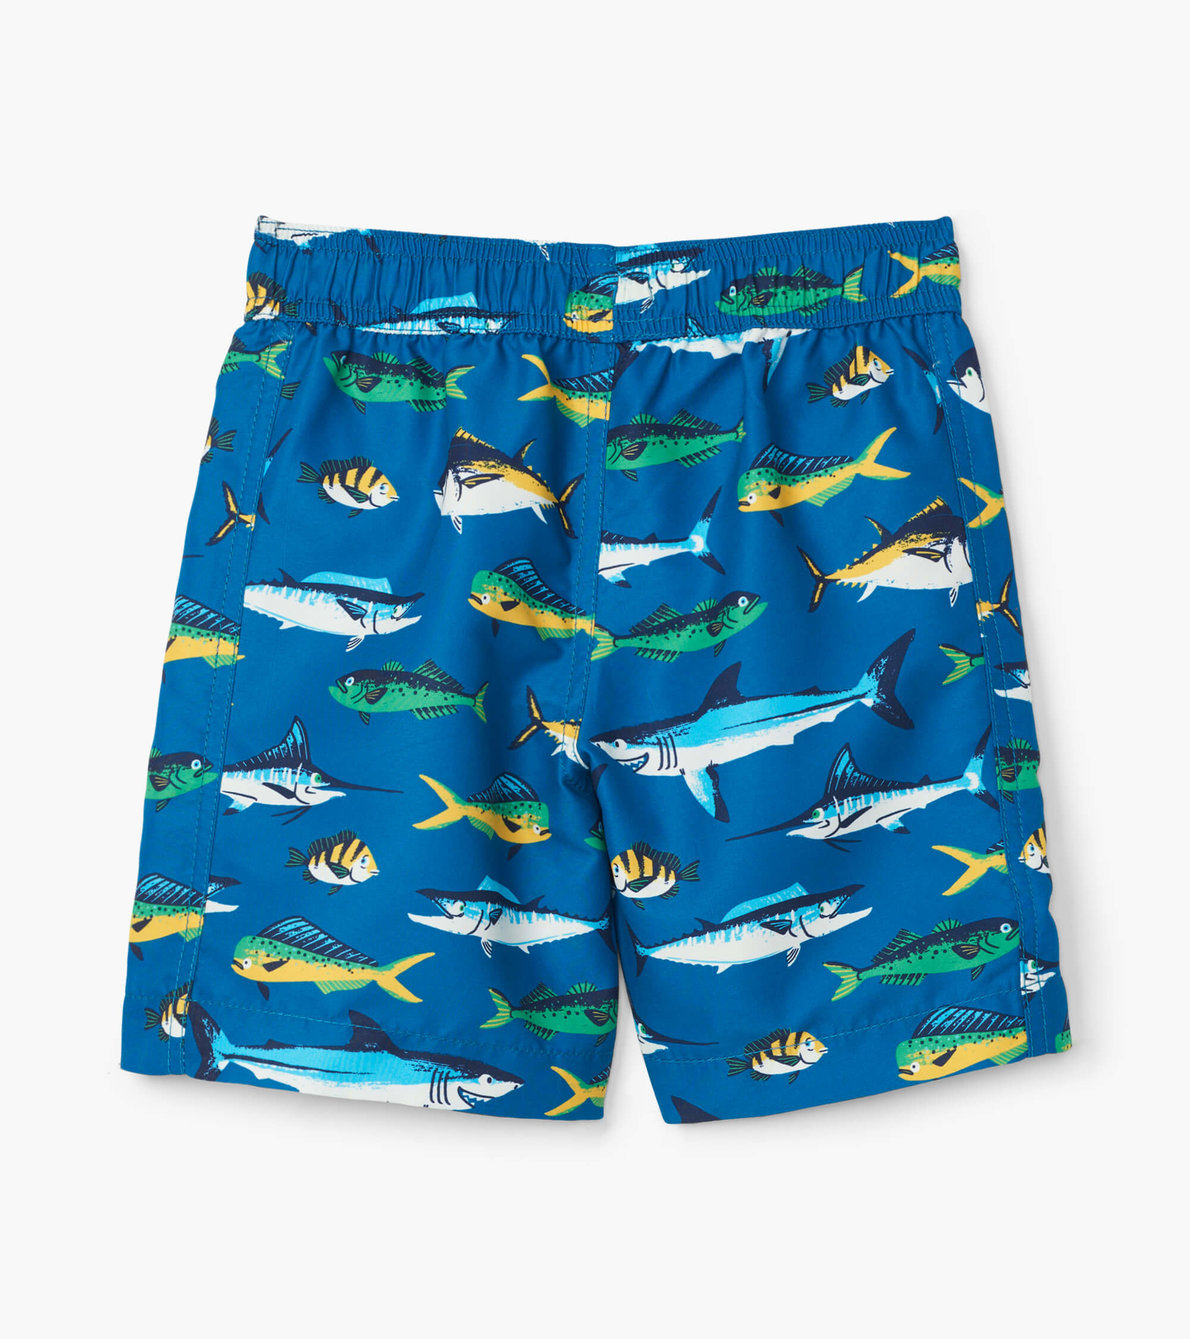 View larger image of Game Fish Swim Trunks